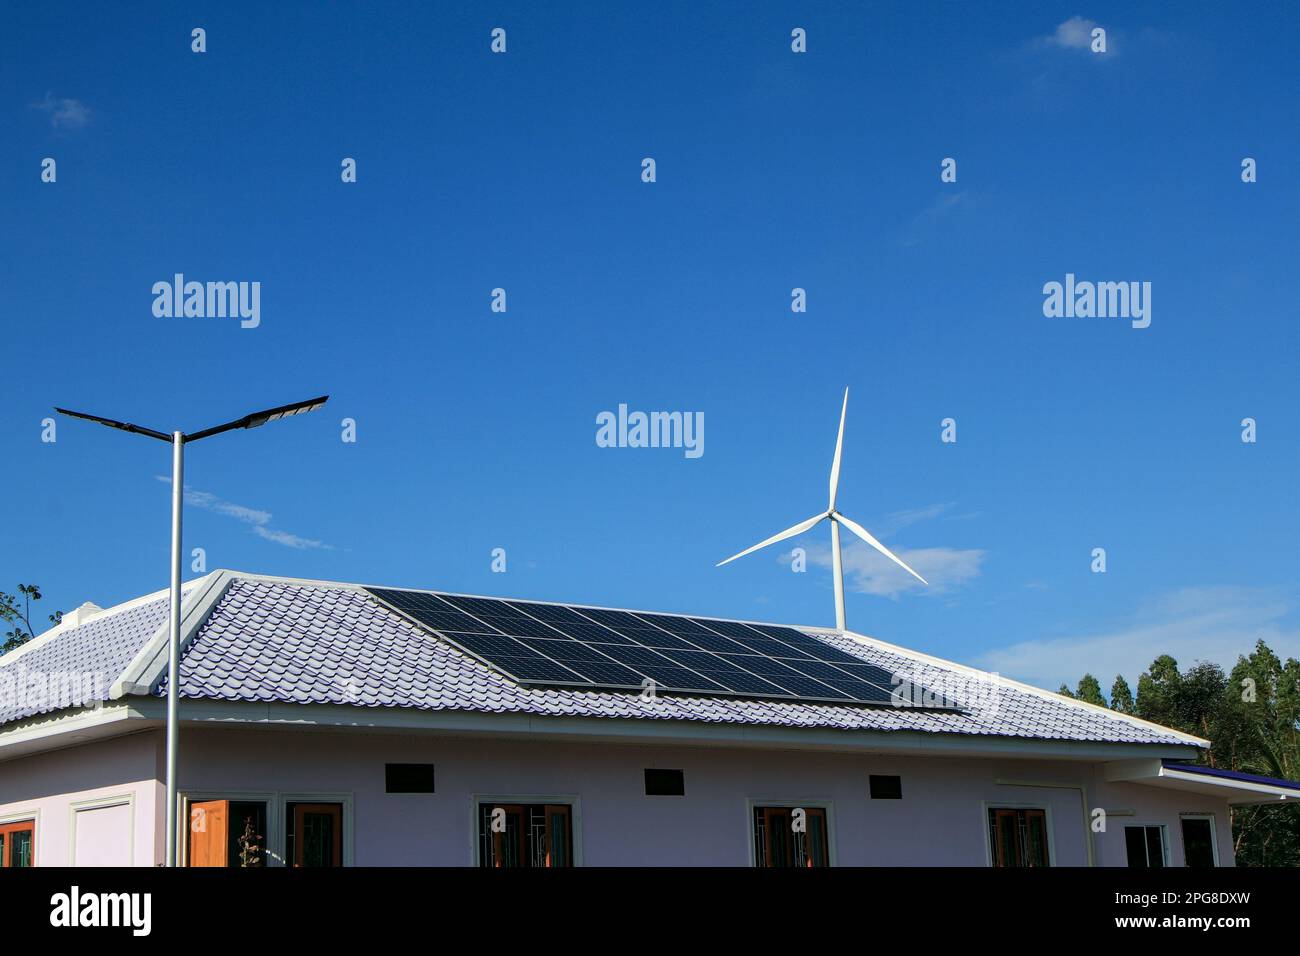 Solar panels on the roof and there are also wind turbines around. The concept of renewable and sustainable resources. Stock Photo